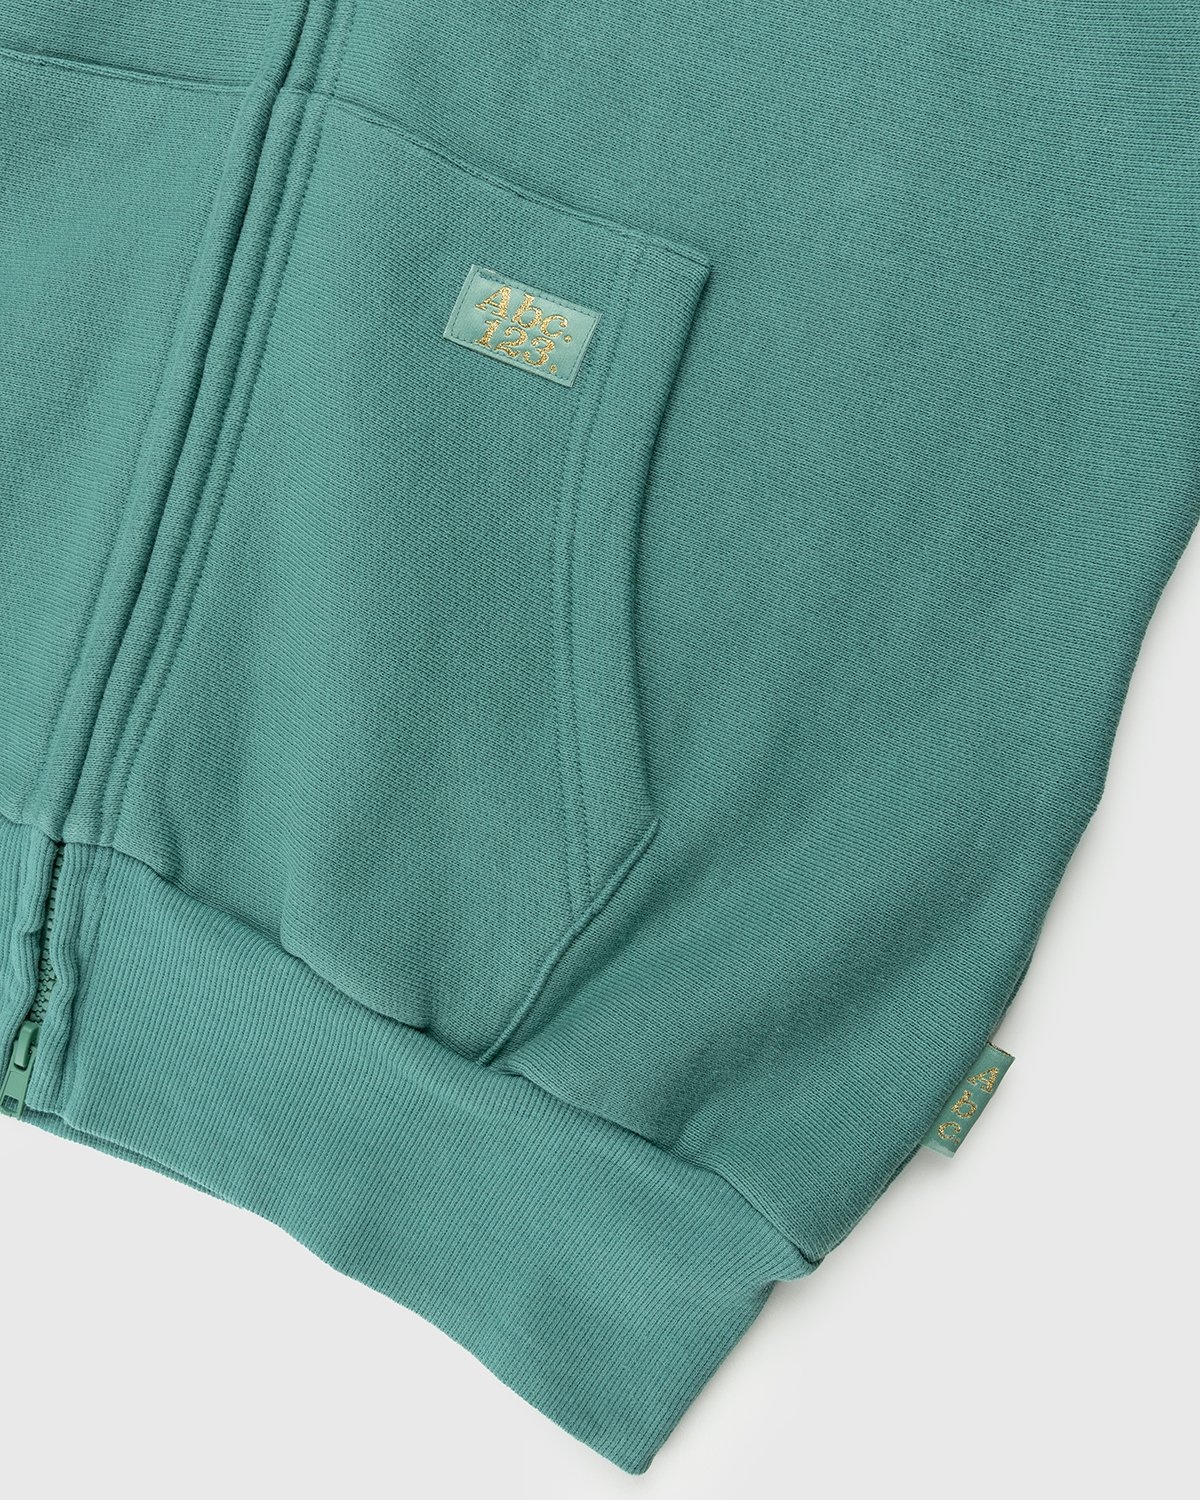 Abc. – Zip-Up French Terry Hoodie Apatite - Sweats - Green - Image 3